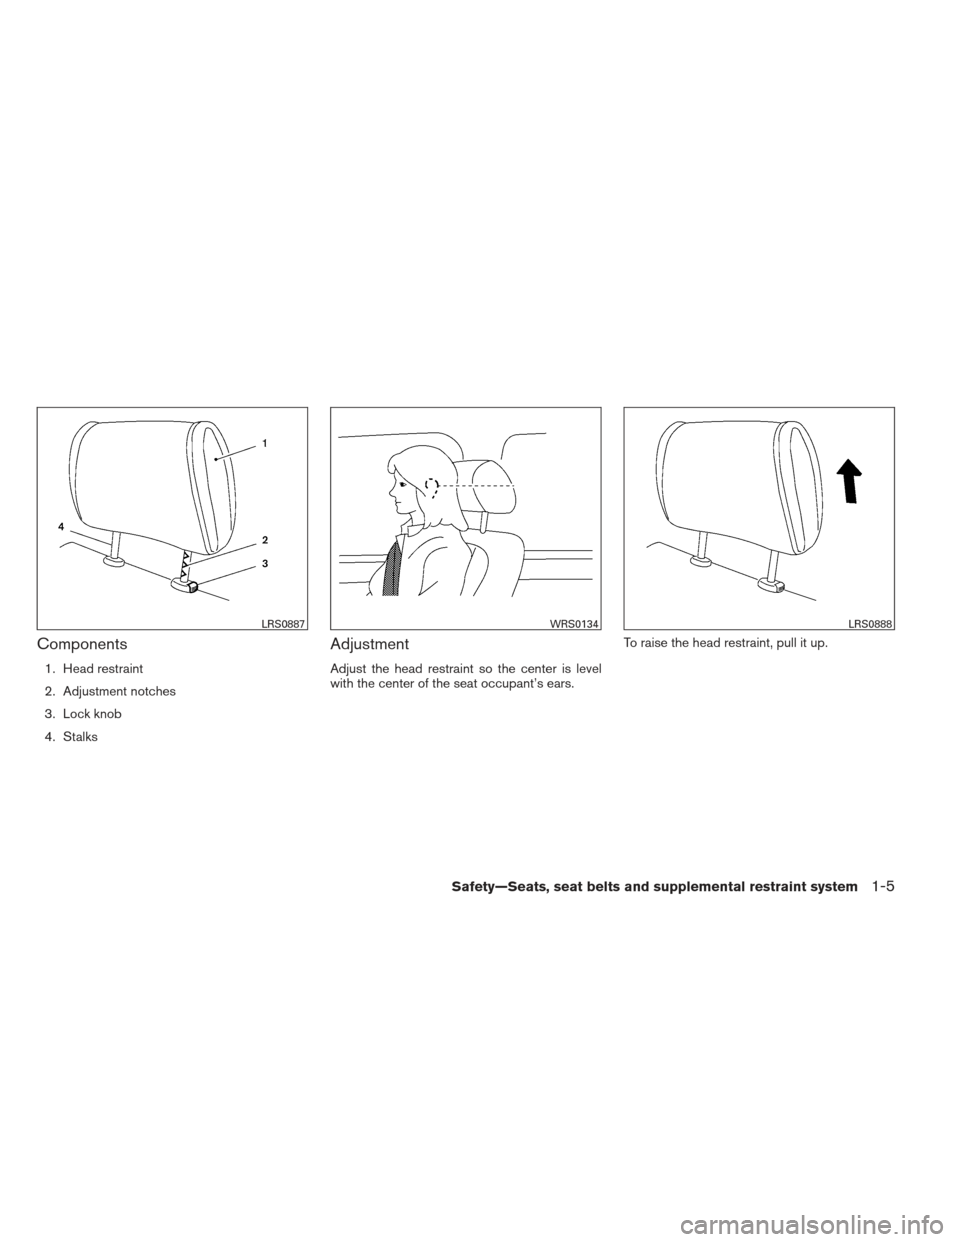 NISSAN XTERRA 2013 N50 / 2.G Owners Manual Components
1. Head restraint
2. Adjustment notches
3. Lock knob
4. Stalks
Adjustment
Adjust the head restraint so the center is level
with the center of the seat occupant’s ears.To raise the head re